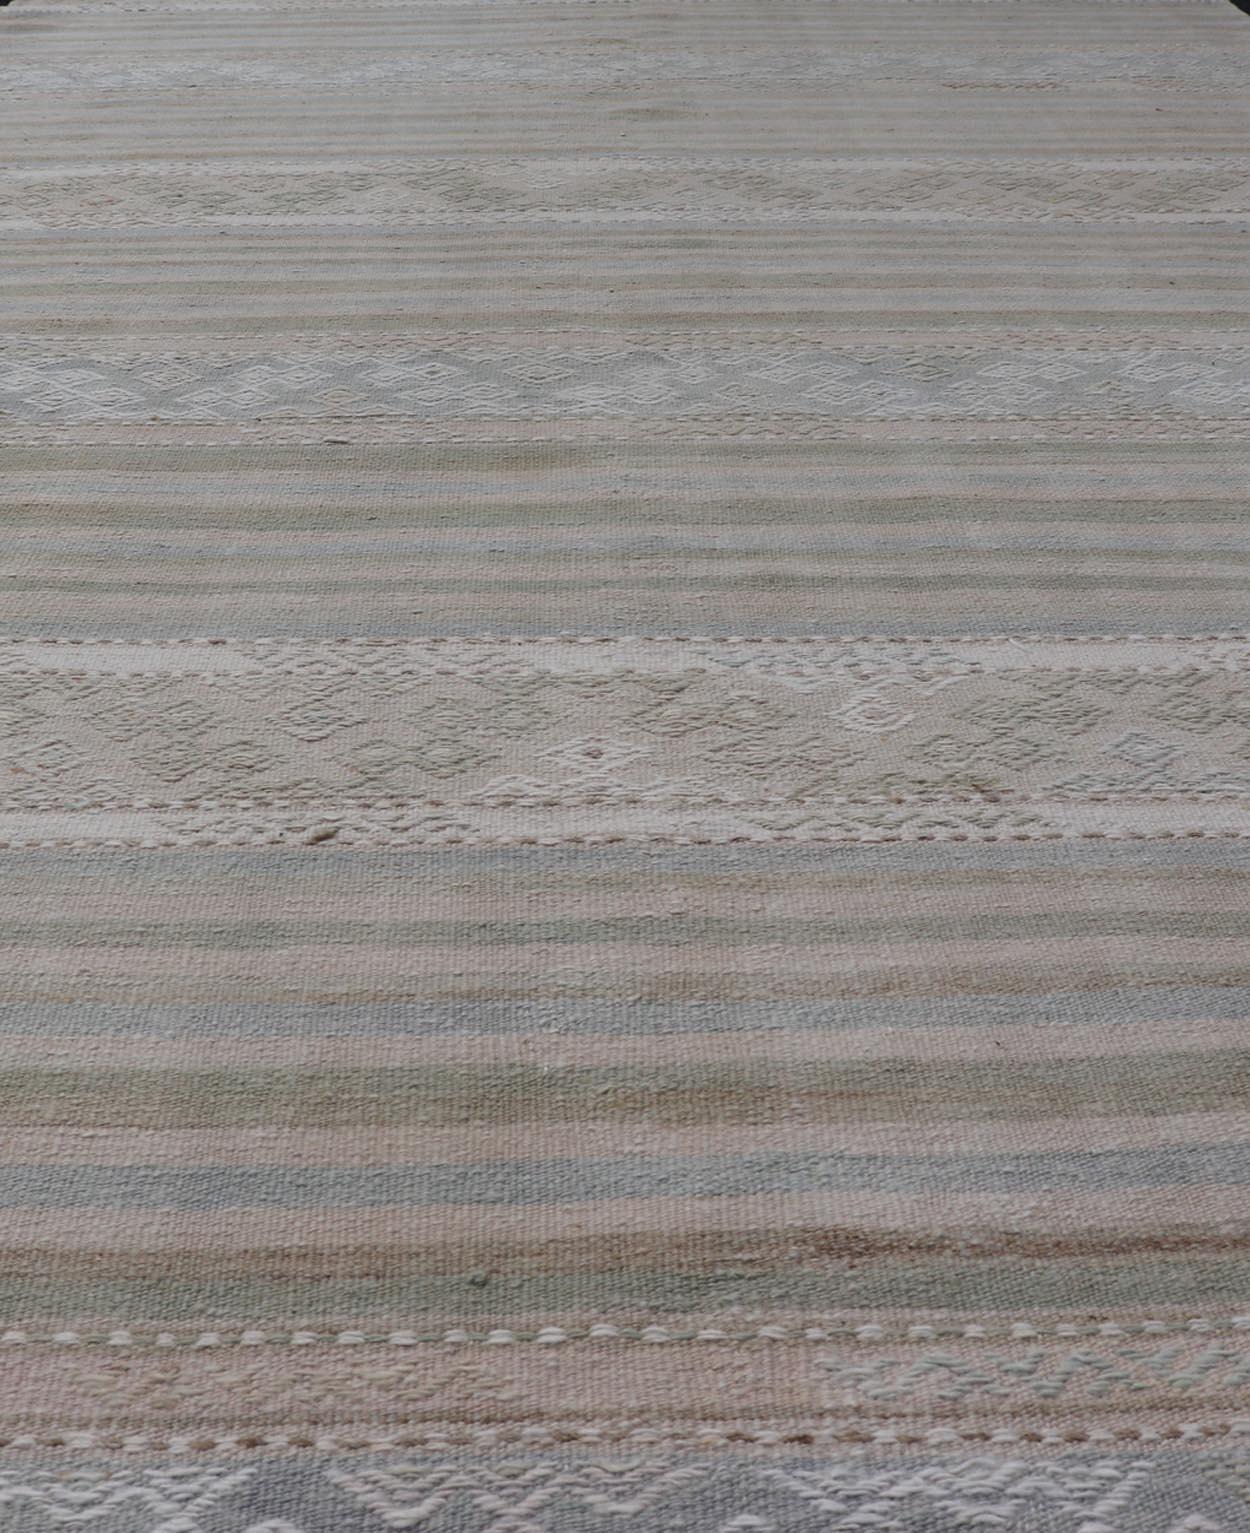 Turkish Gallery Flat-Weave Kilim in Muted Colors with Stripes and Embroideries In Good Condition For Sale In Atlanta, GA